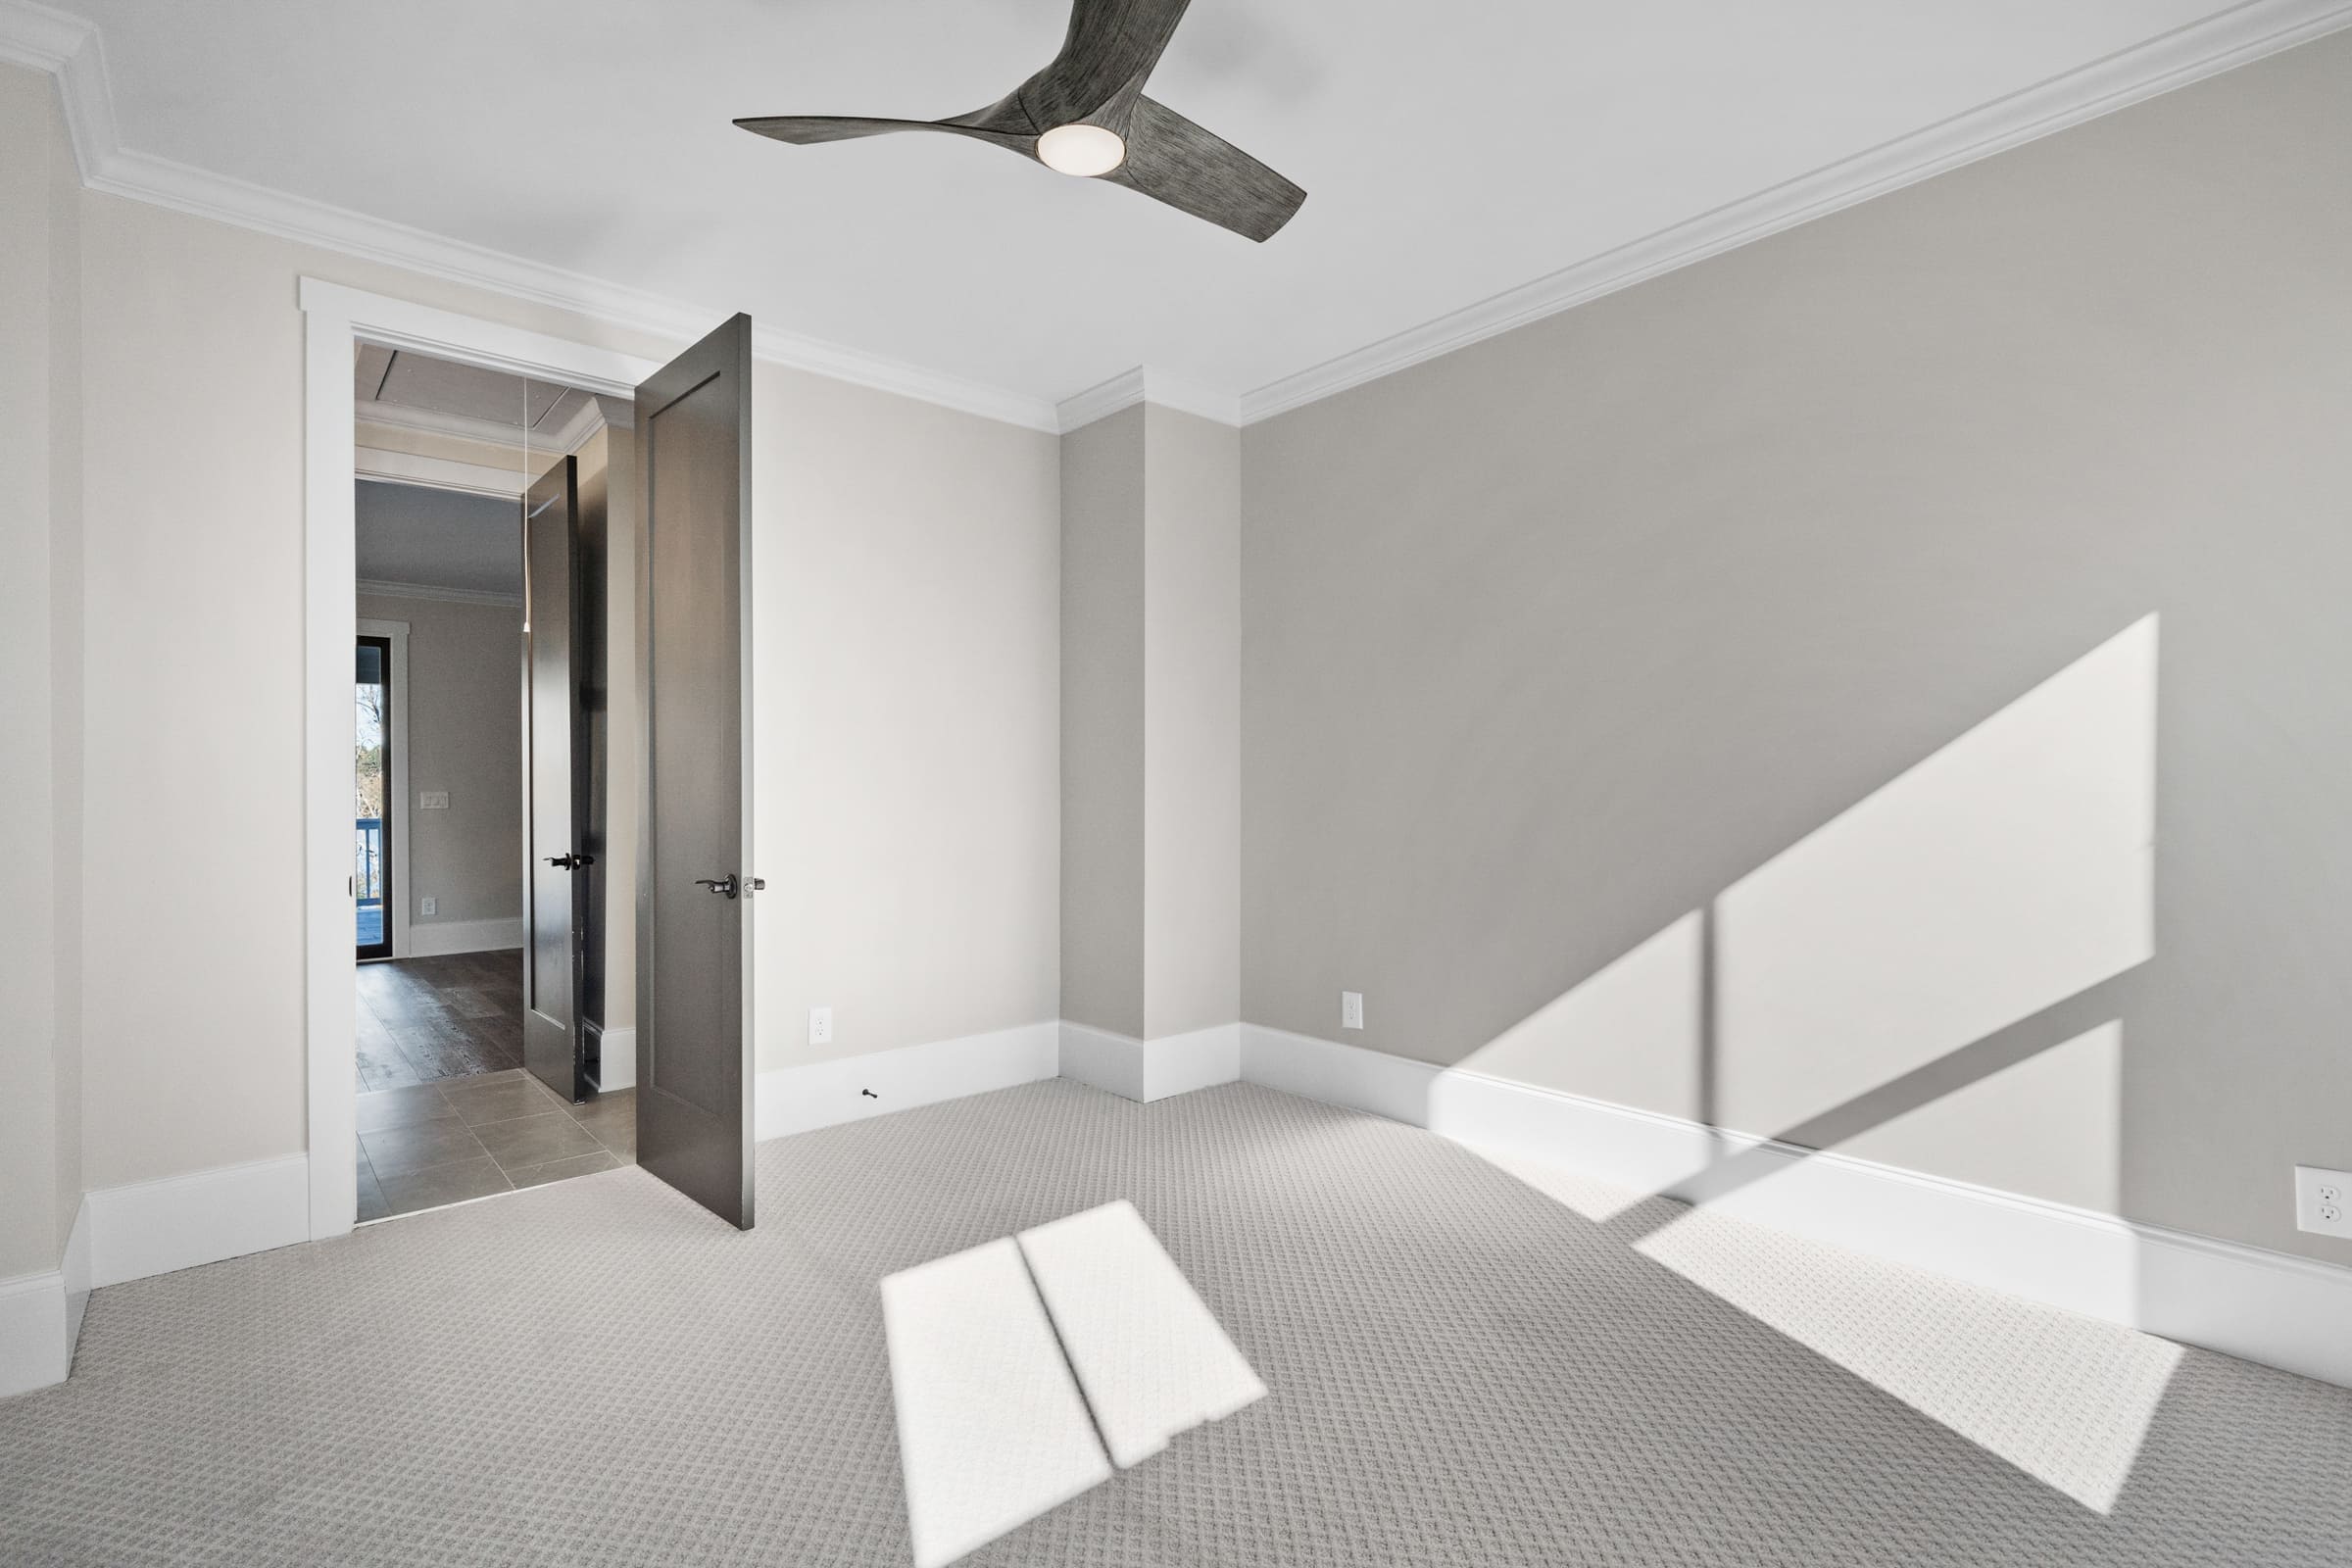 Carpeted Bedroom or Office with Dark Wood Ceiling Fan